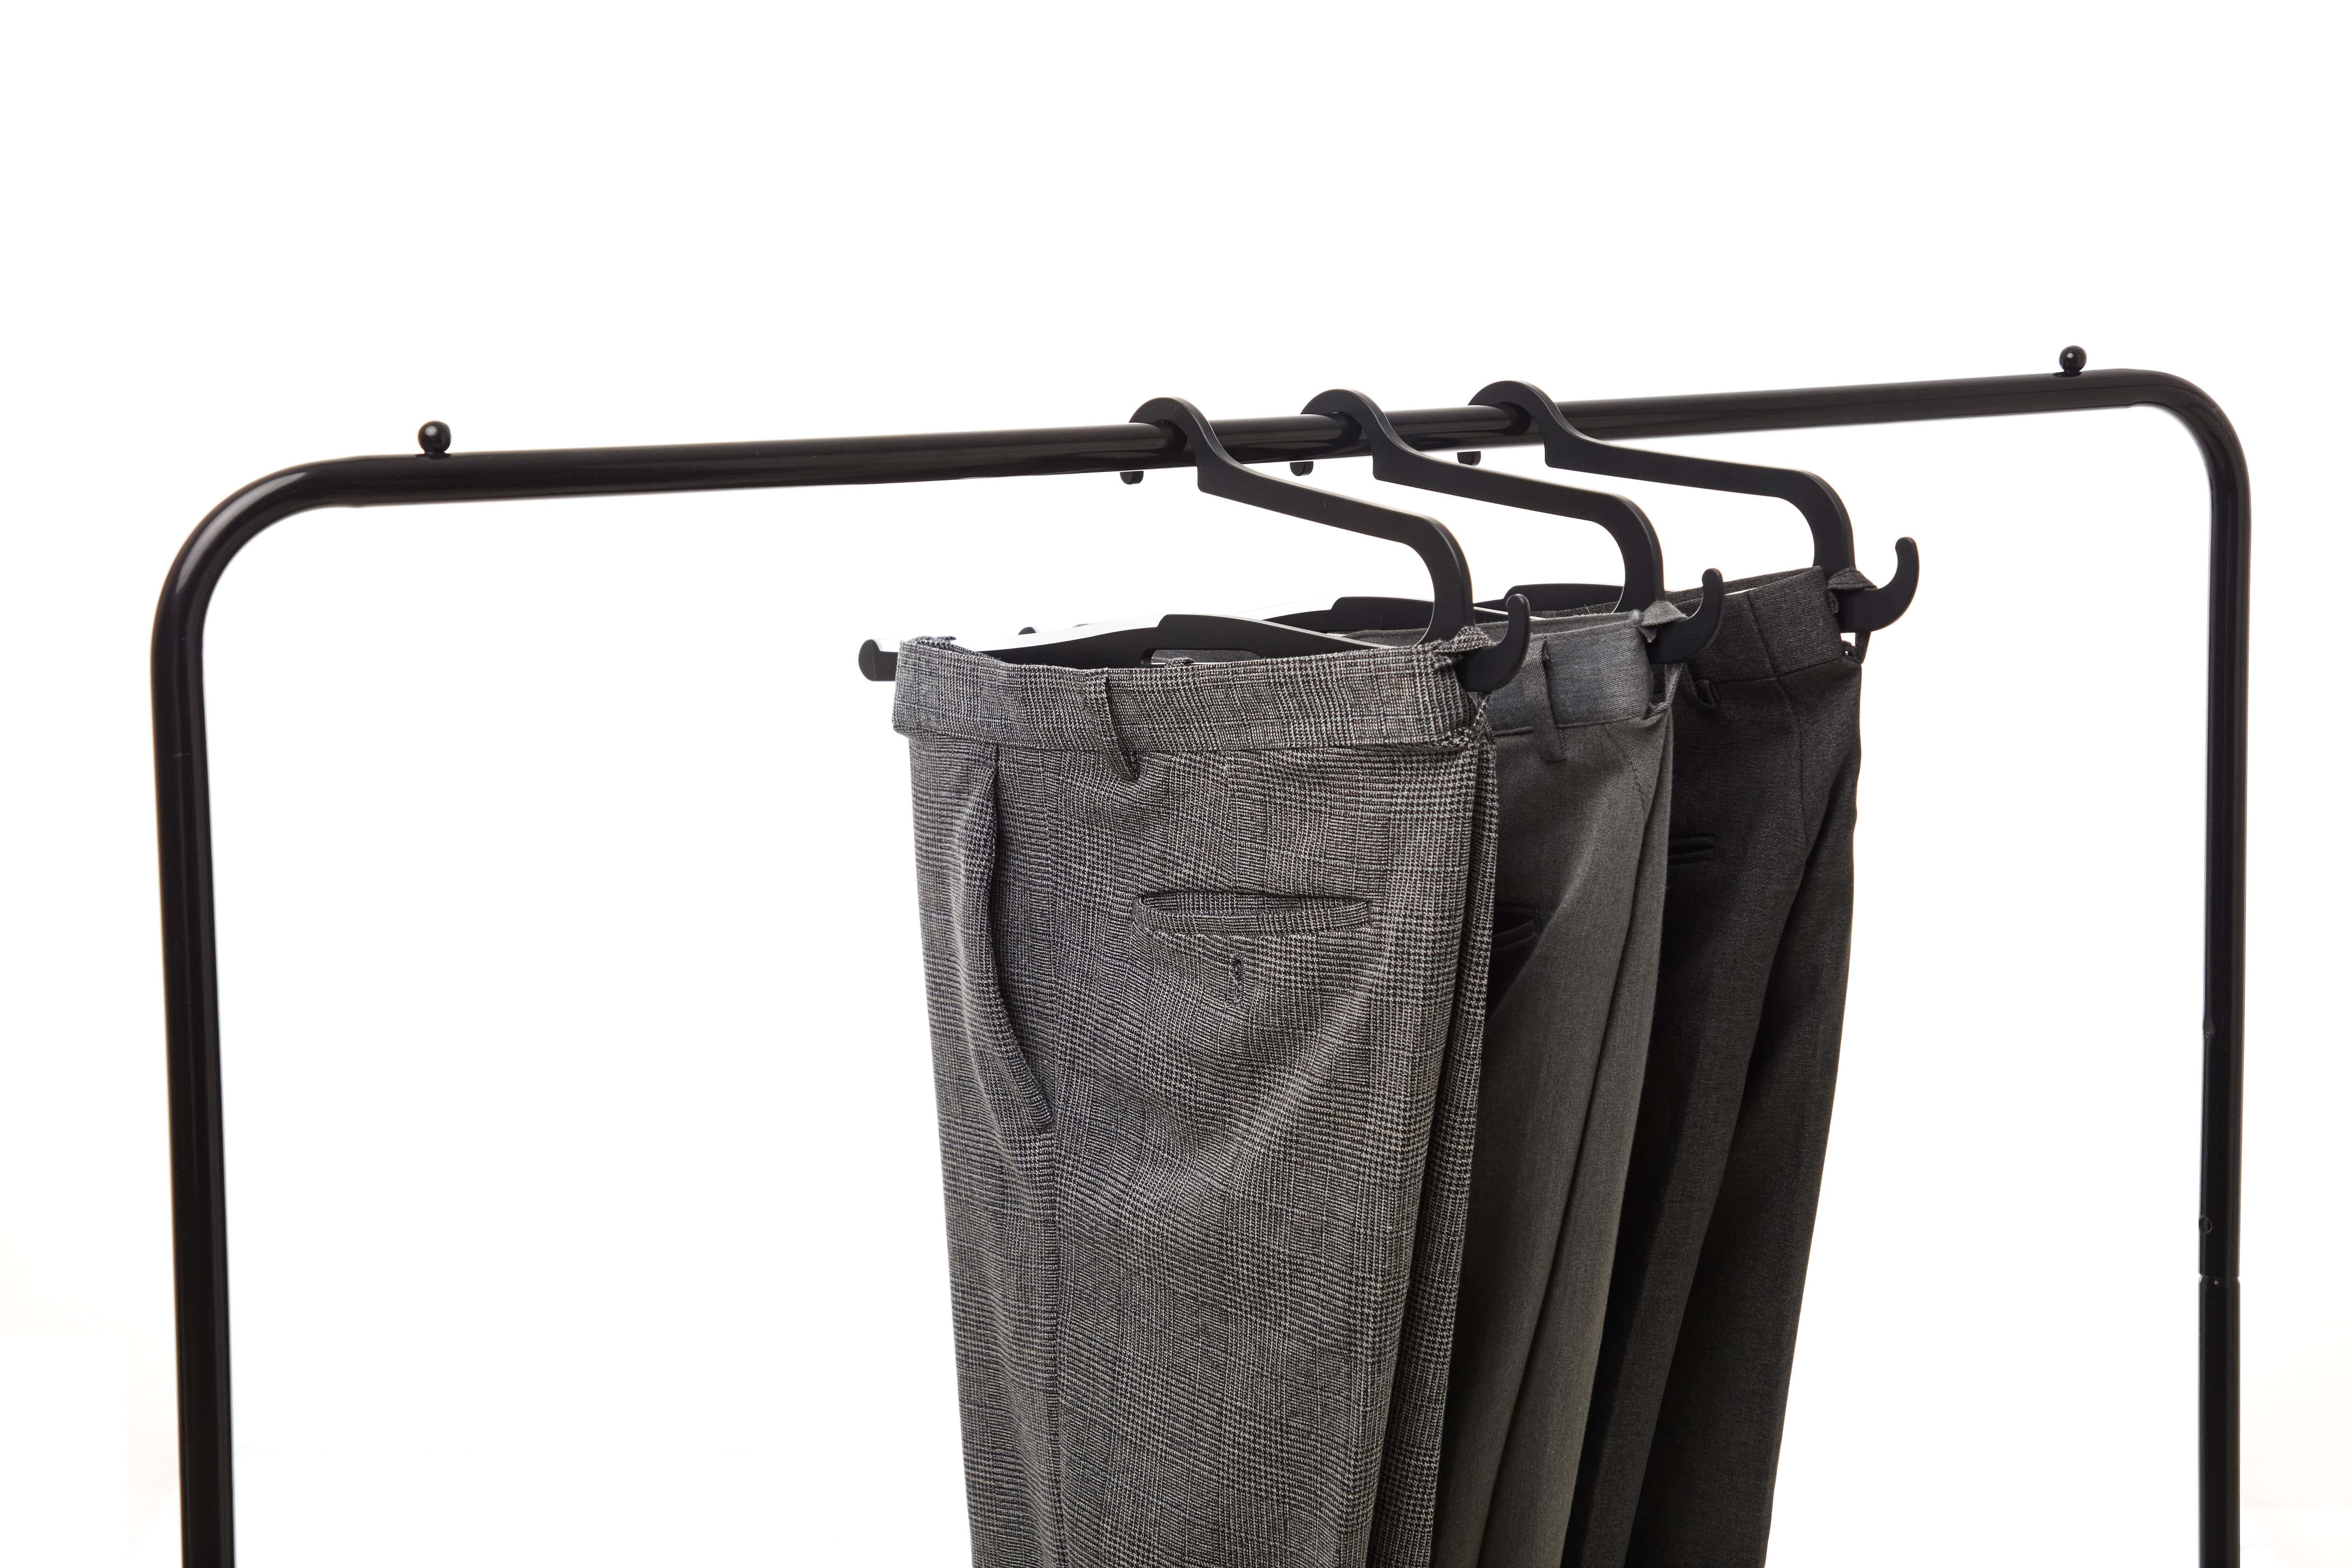 HURDLE HANGER  Designed to Organize Your Closet in a Snap by CollaboSpace  — Kickstarter